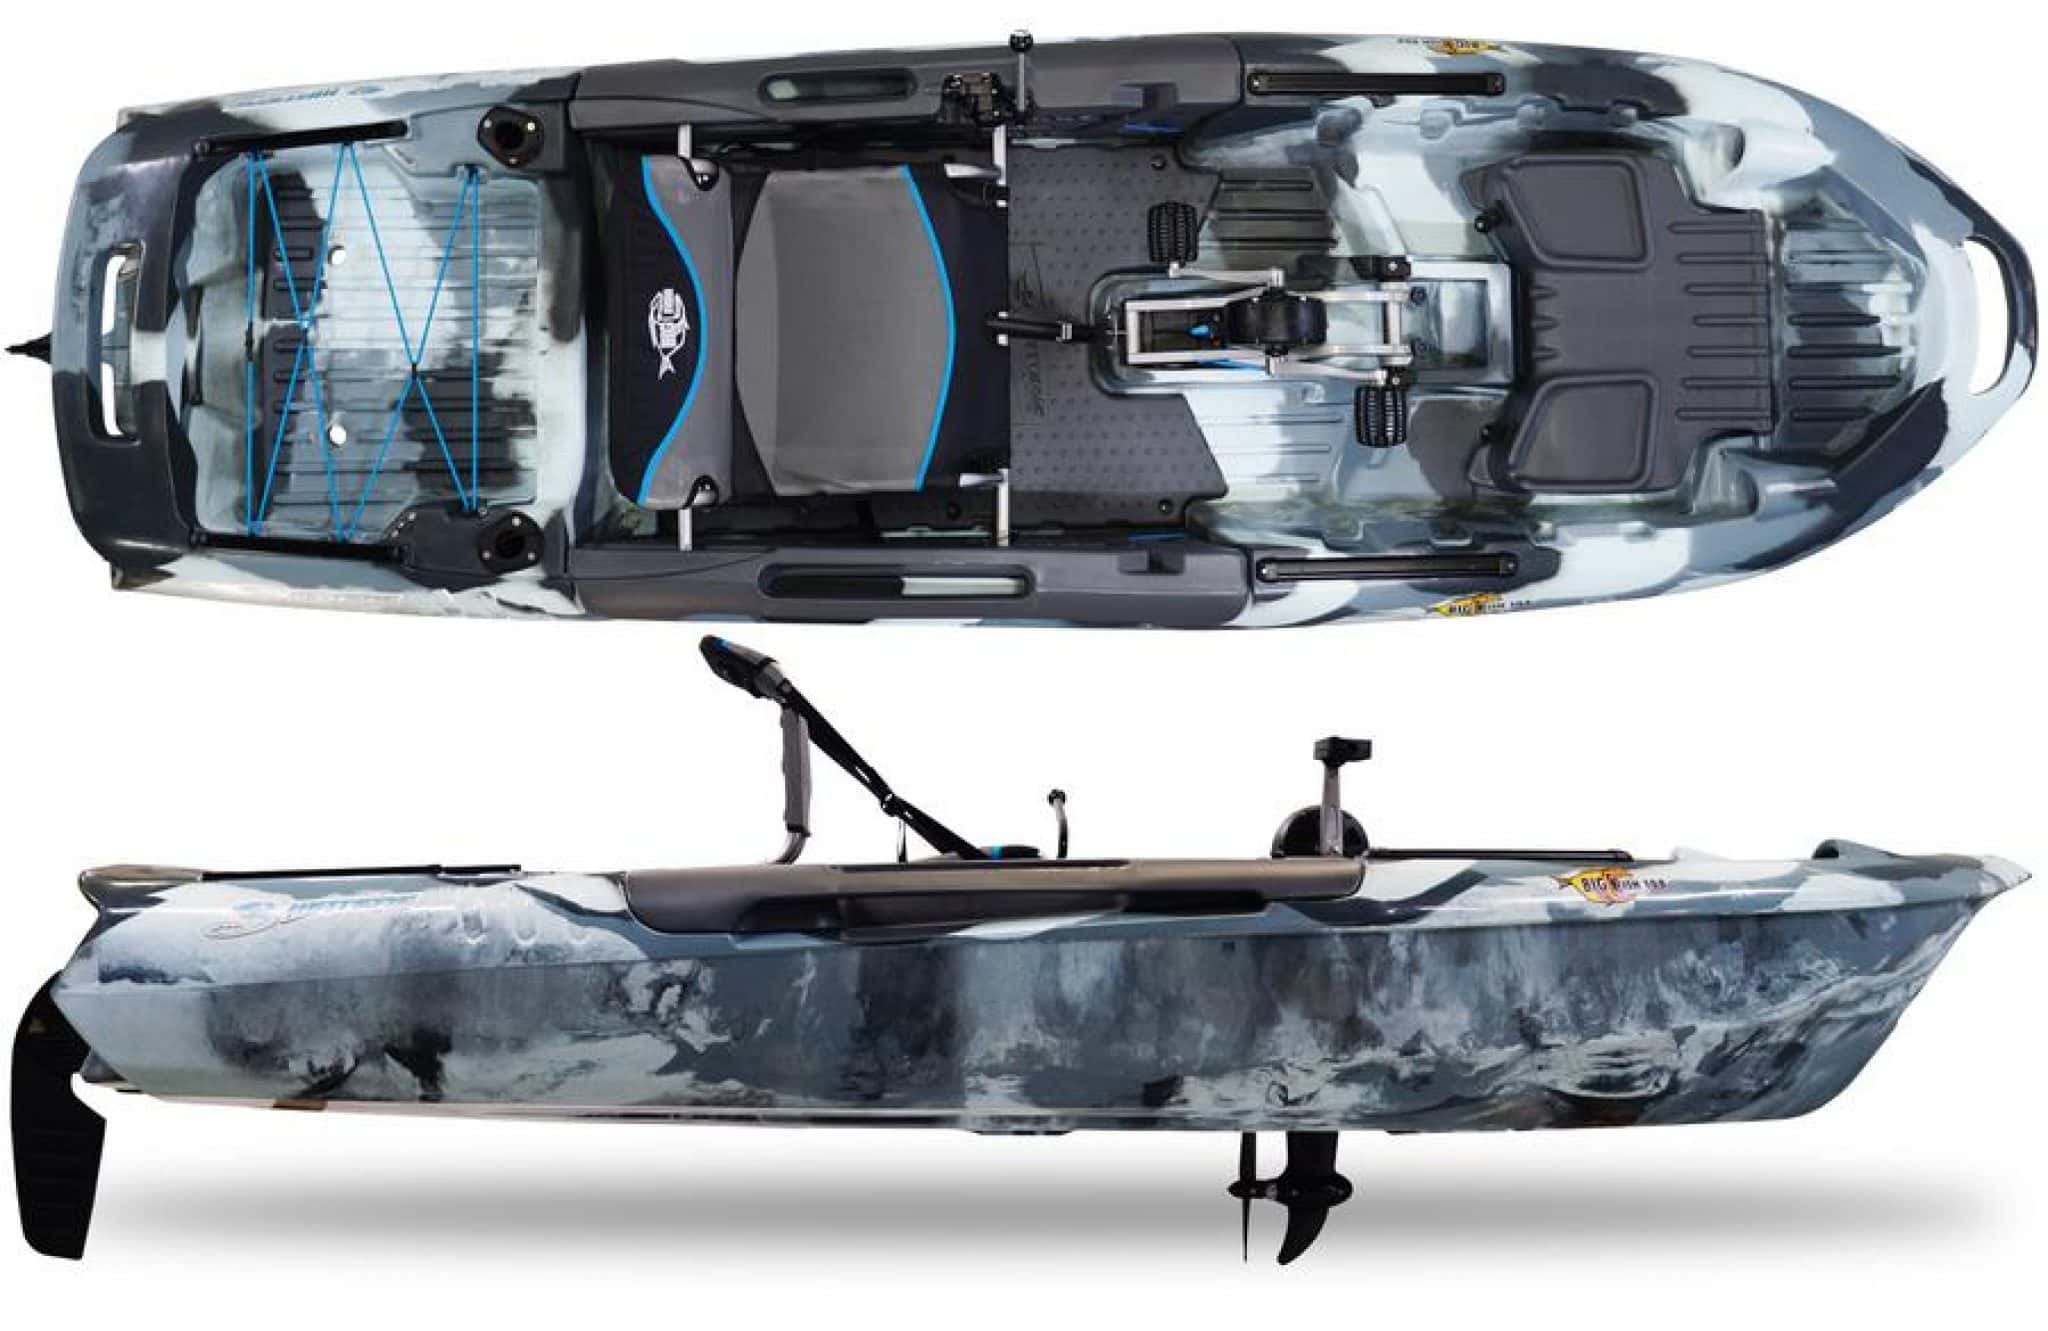 Best Pedal Kayak in 2023 10 Top Kayaks with Pedals for Fishing and Fun